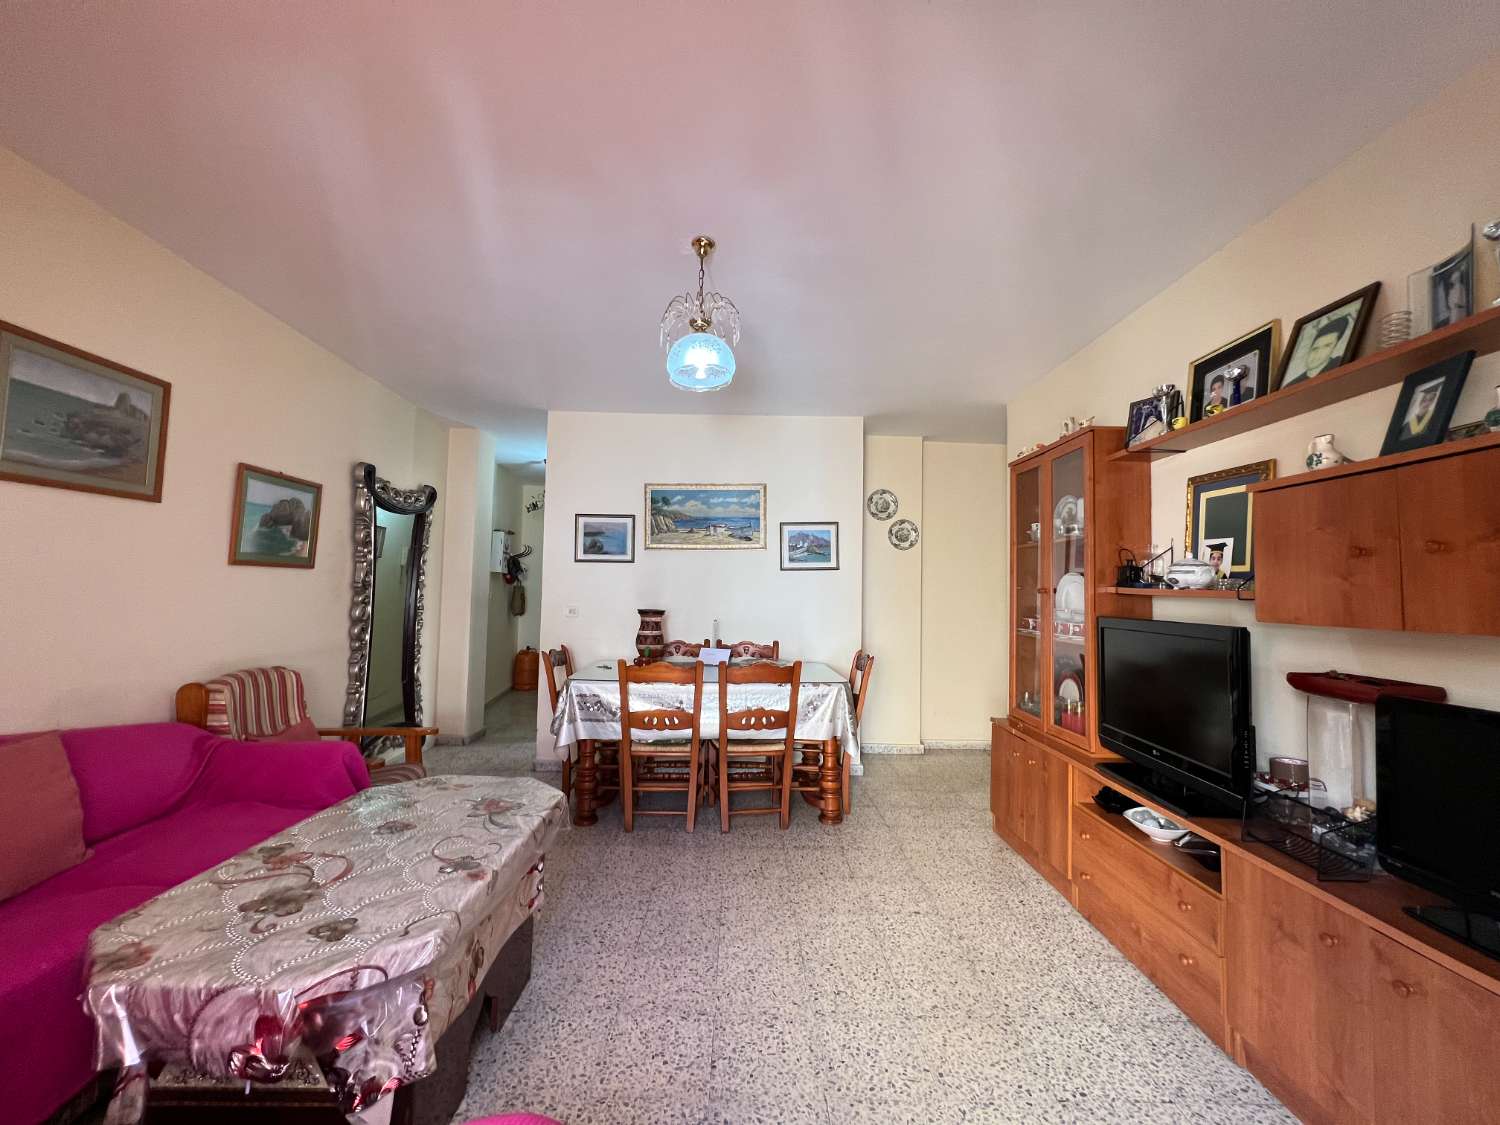 Central apartment for sale in Nerja